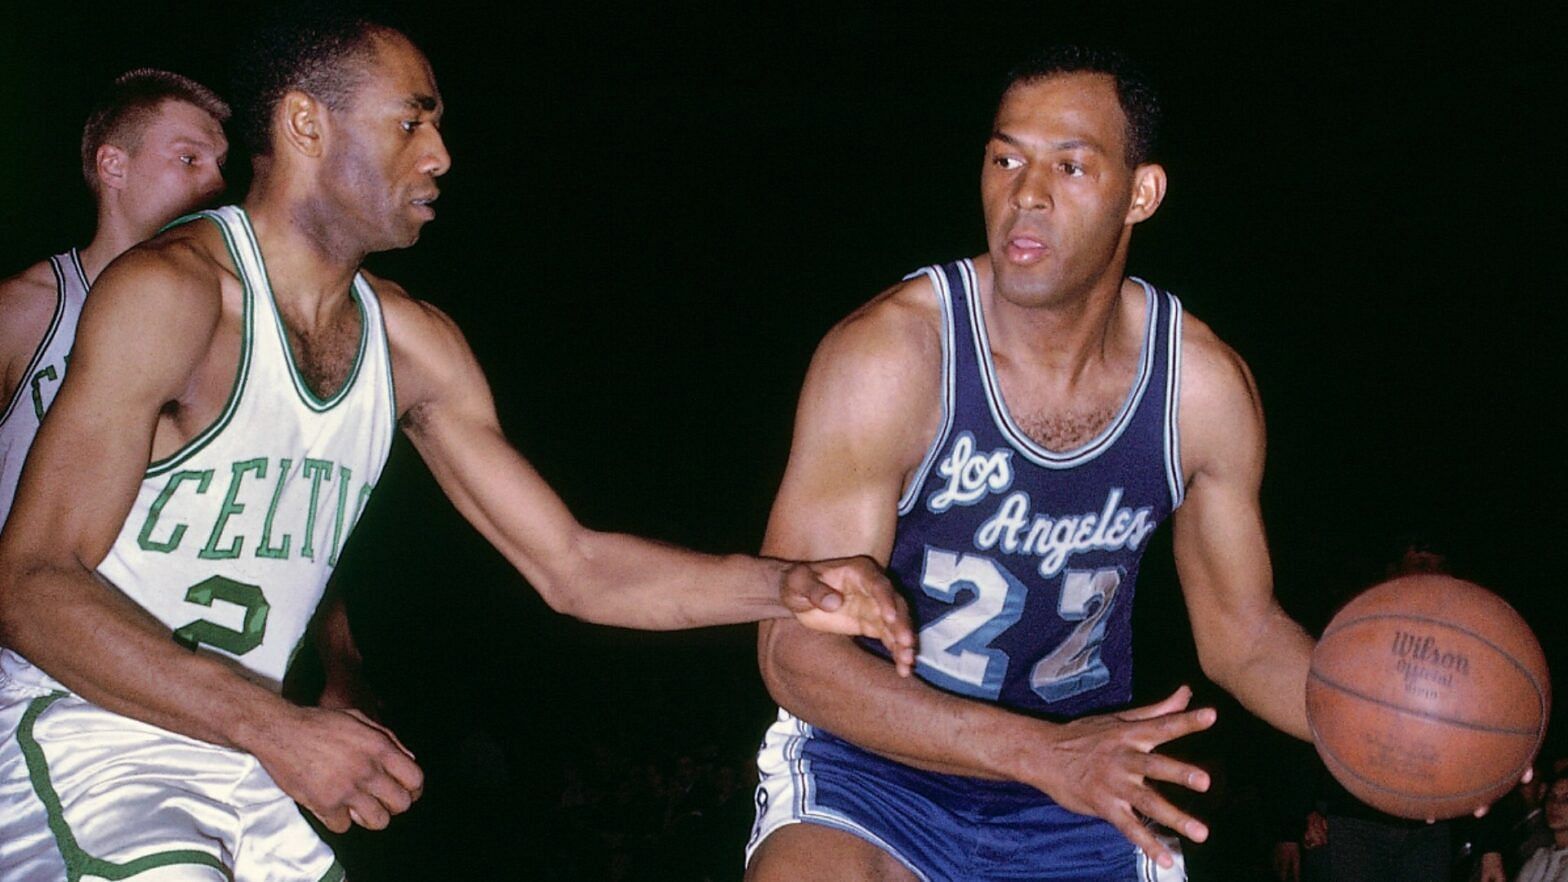 Elgin Baylor (right) went 0-7 in the NBA Finals. [photo: NBA.com]